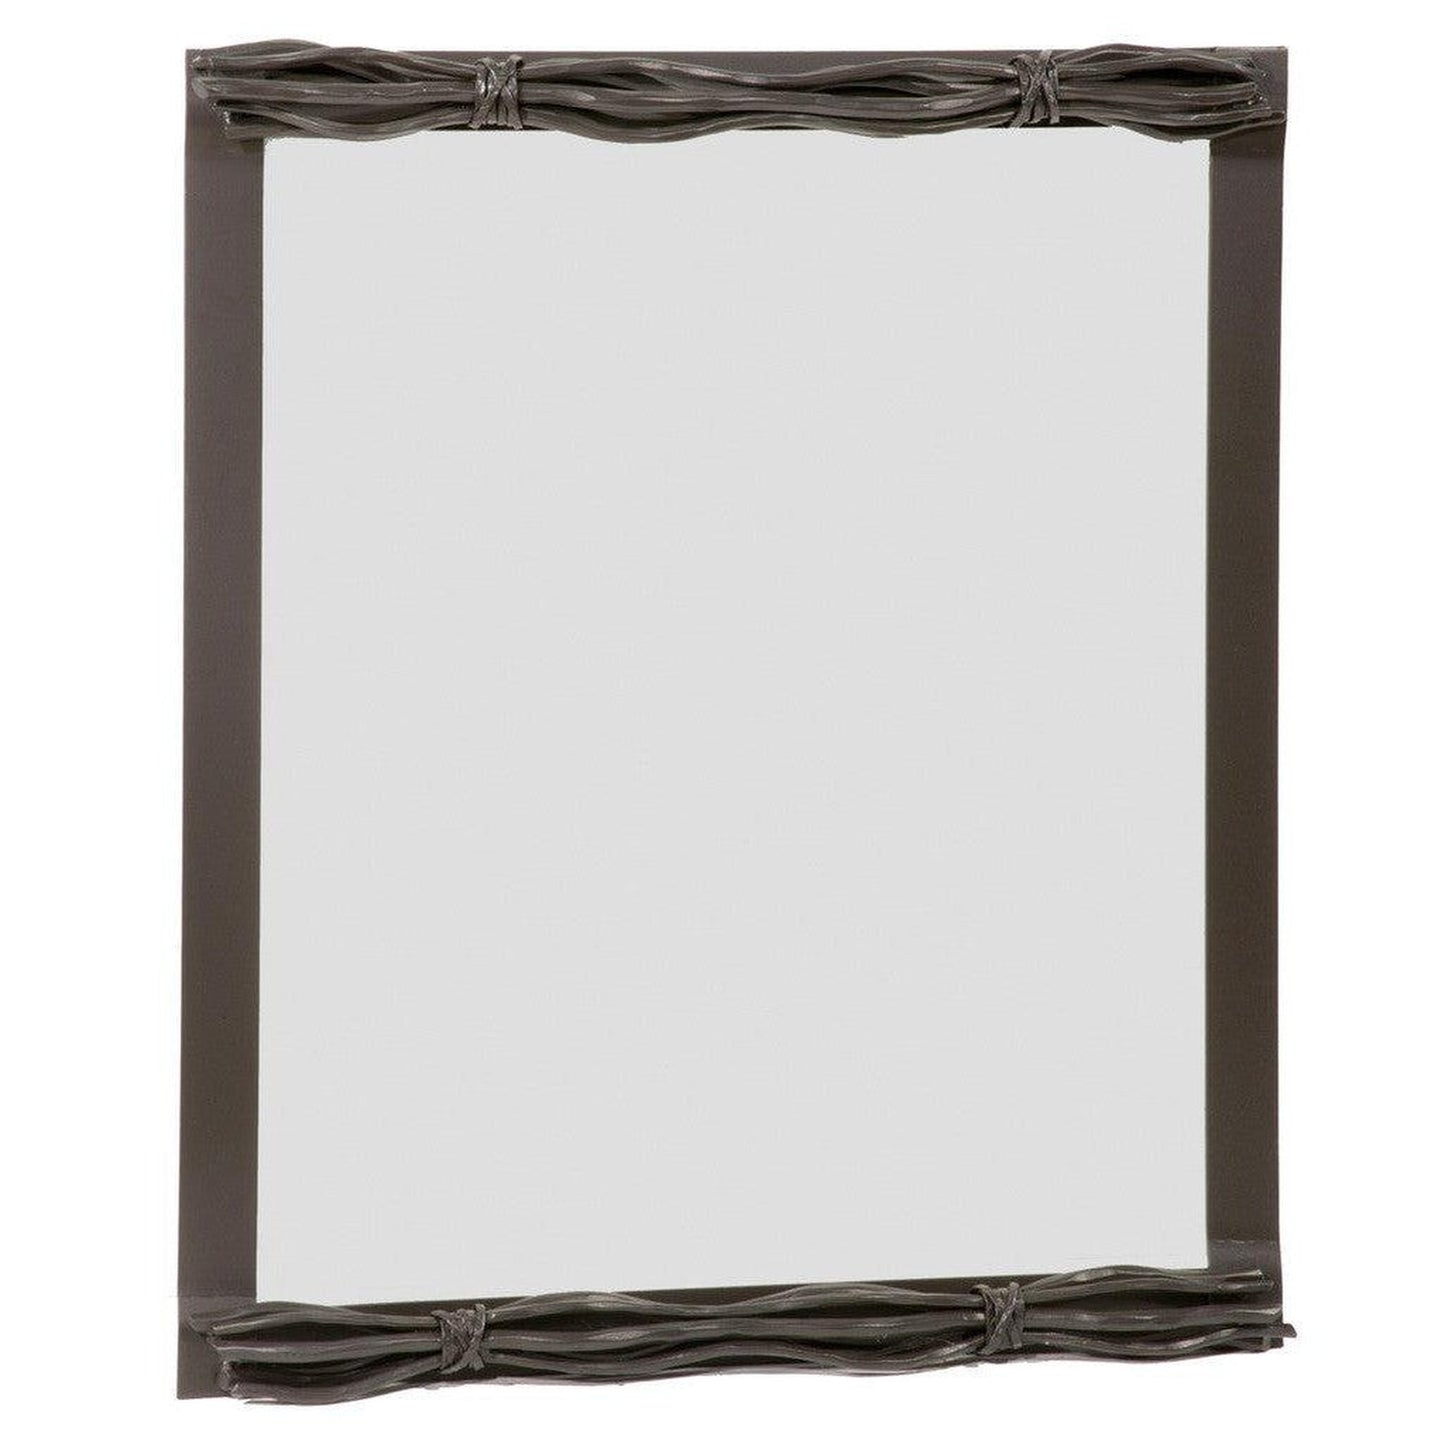 Stone County Ironworks Rush 21" x 26" Small Satin Black Iron Wall Mirror With Copper Iron Accent